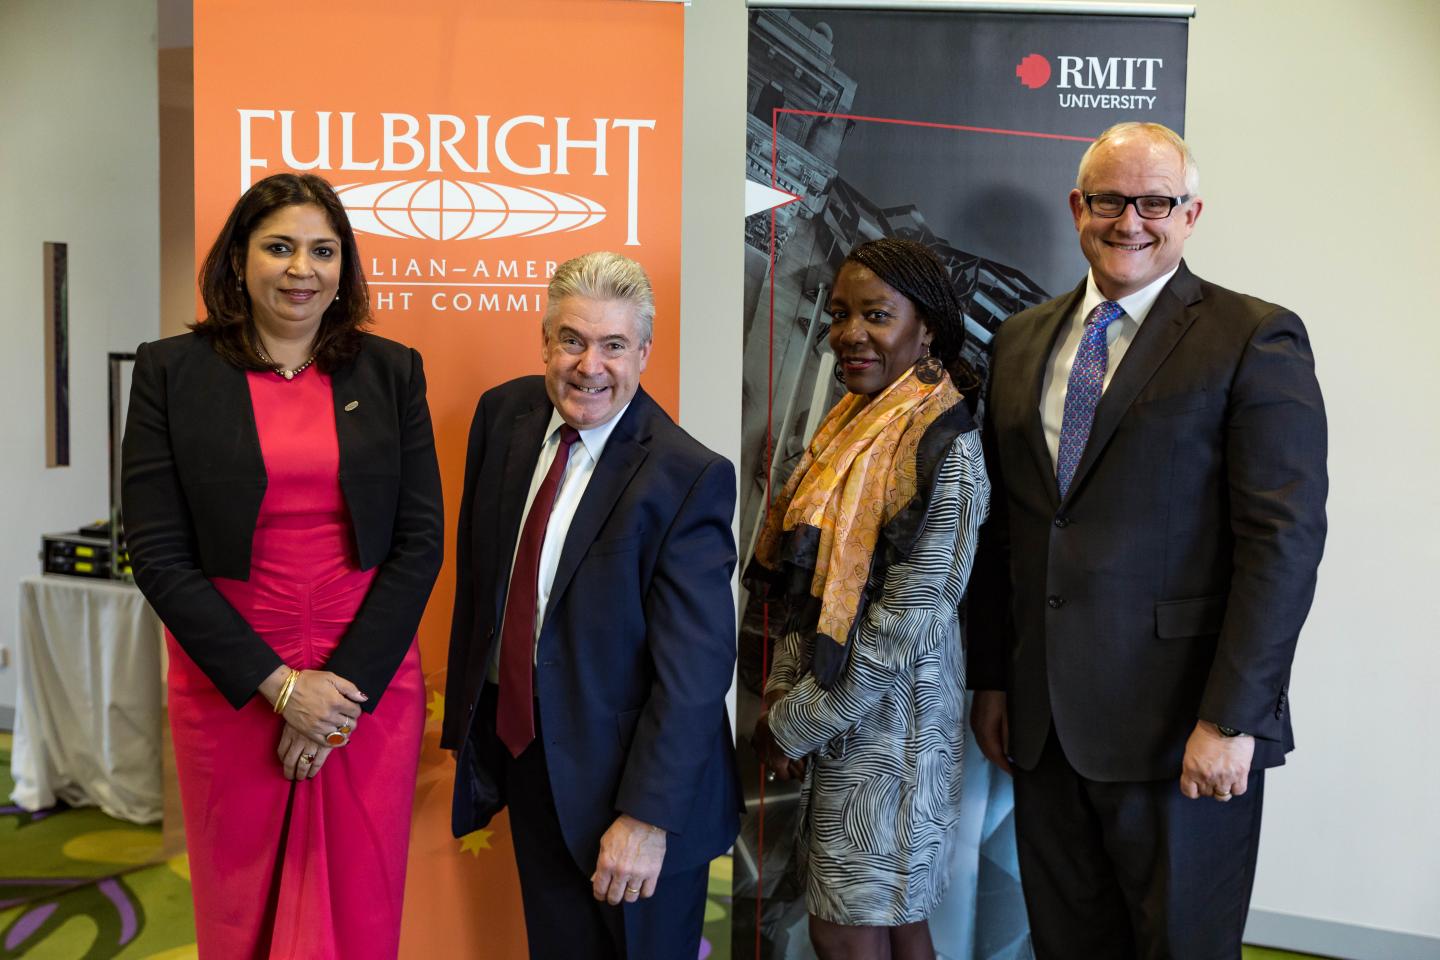 Partnership Agreement Formalized Between Fulbright And RMIT